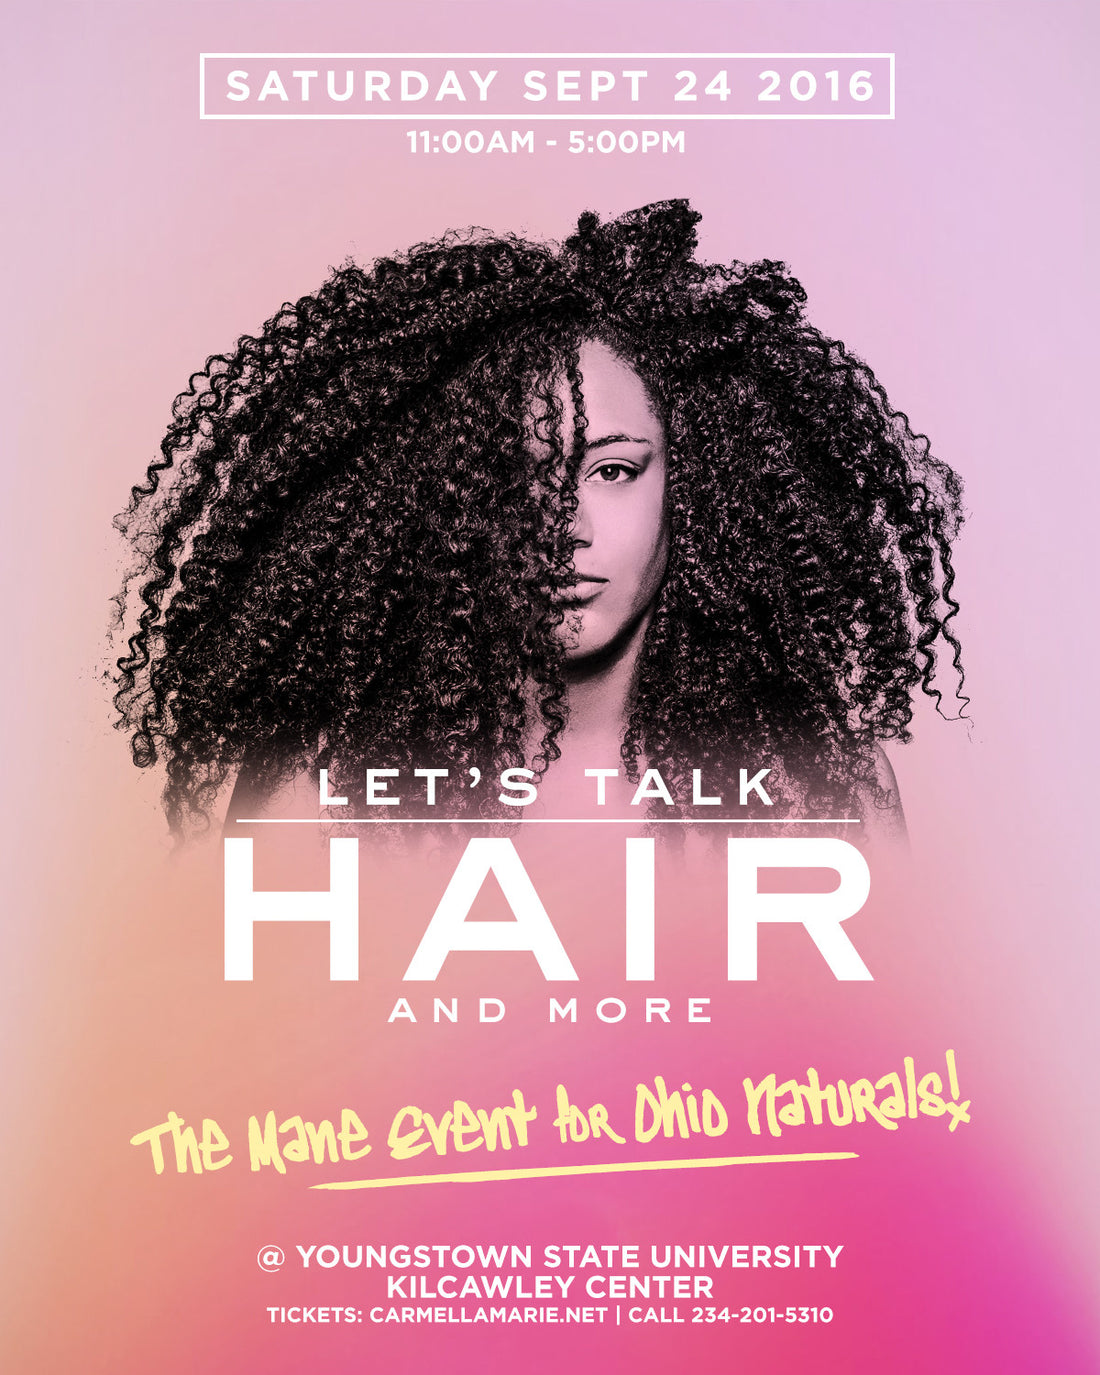 Let’s Talk Hair: The Mane Event for Ohio Naturals